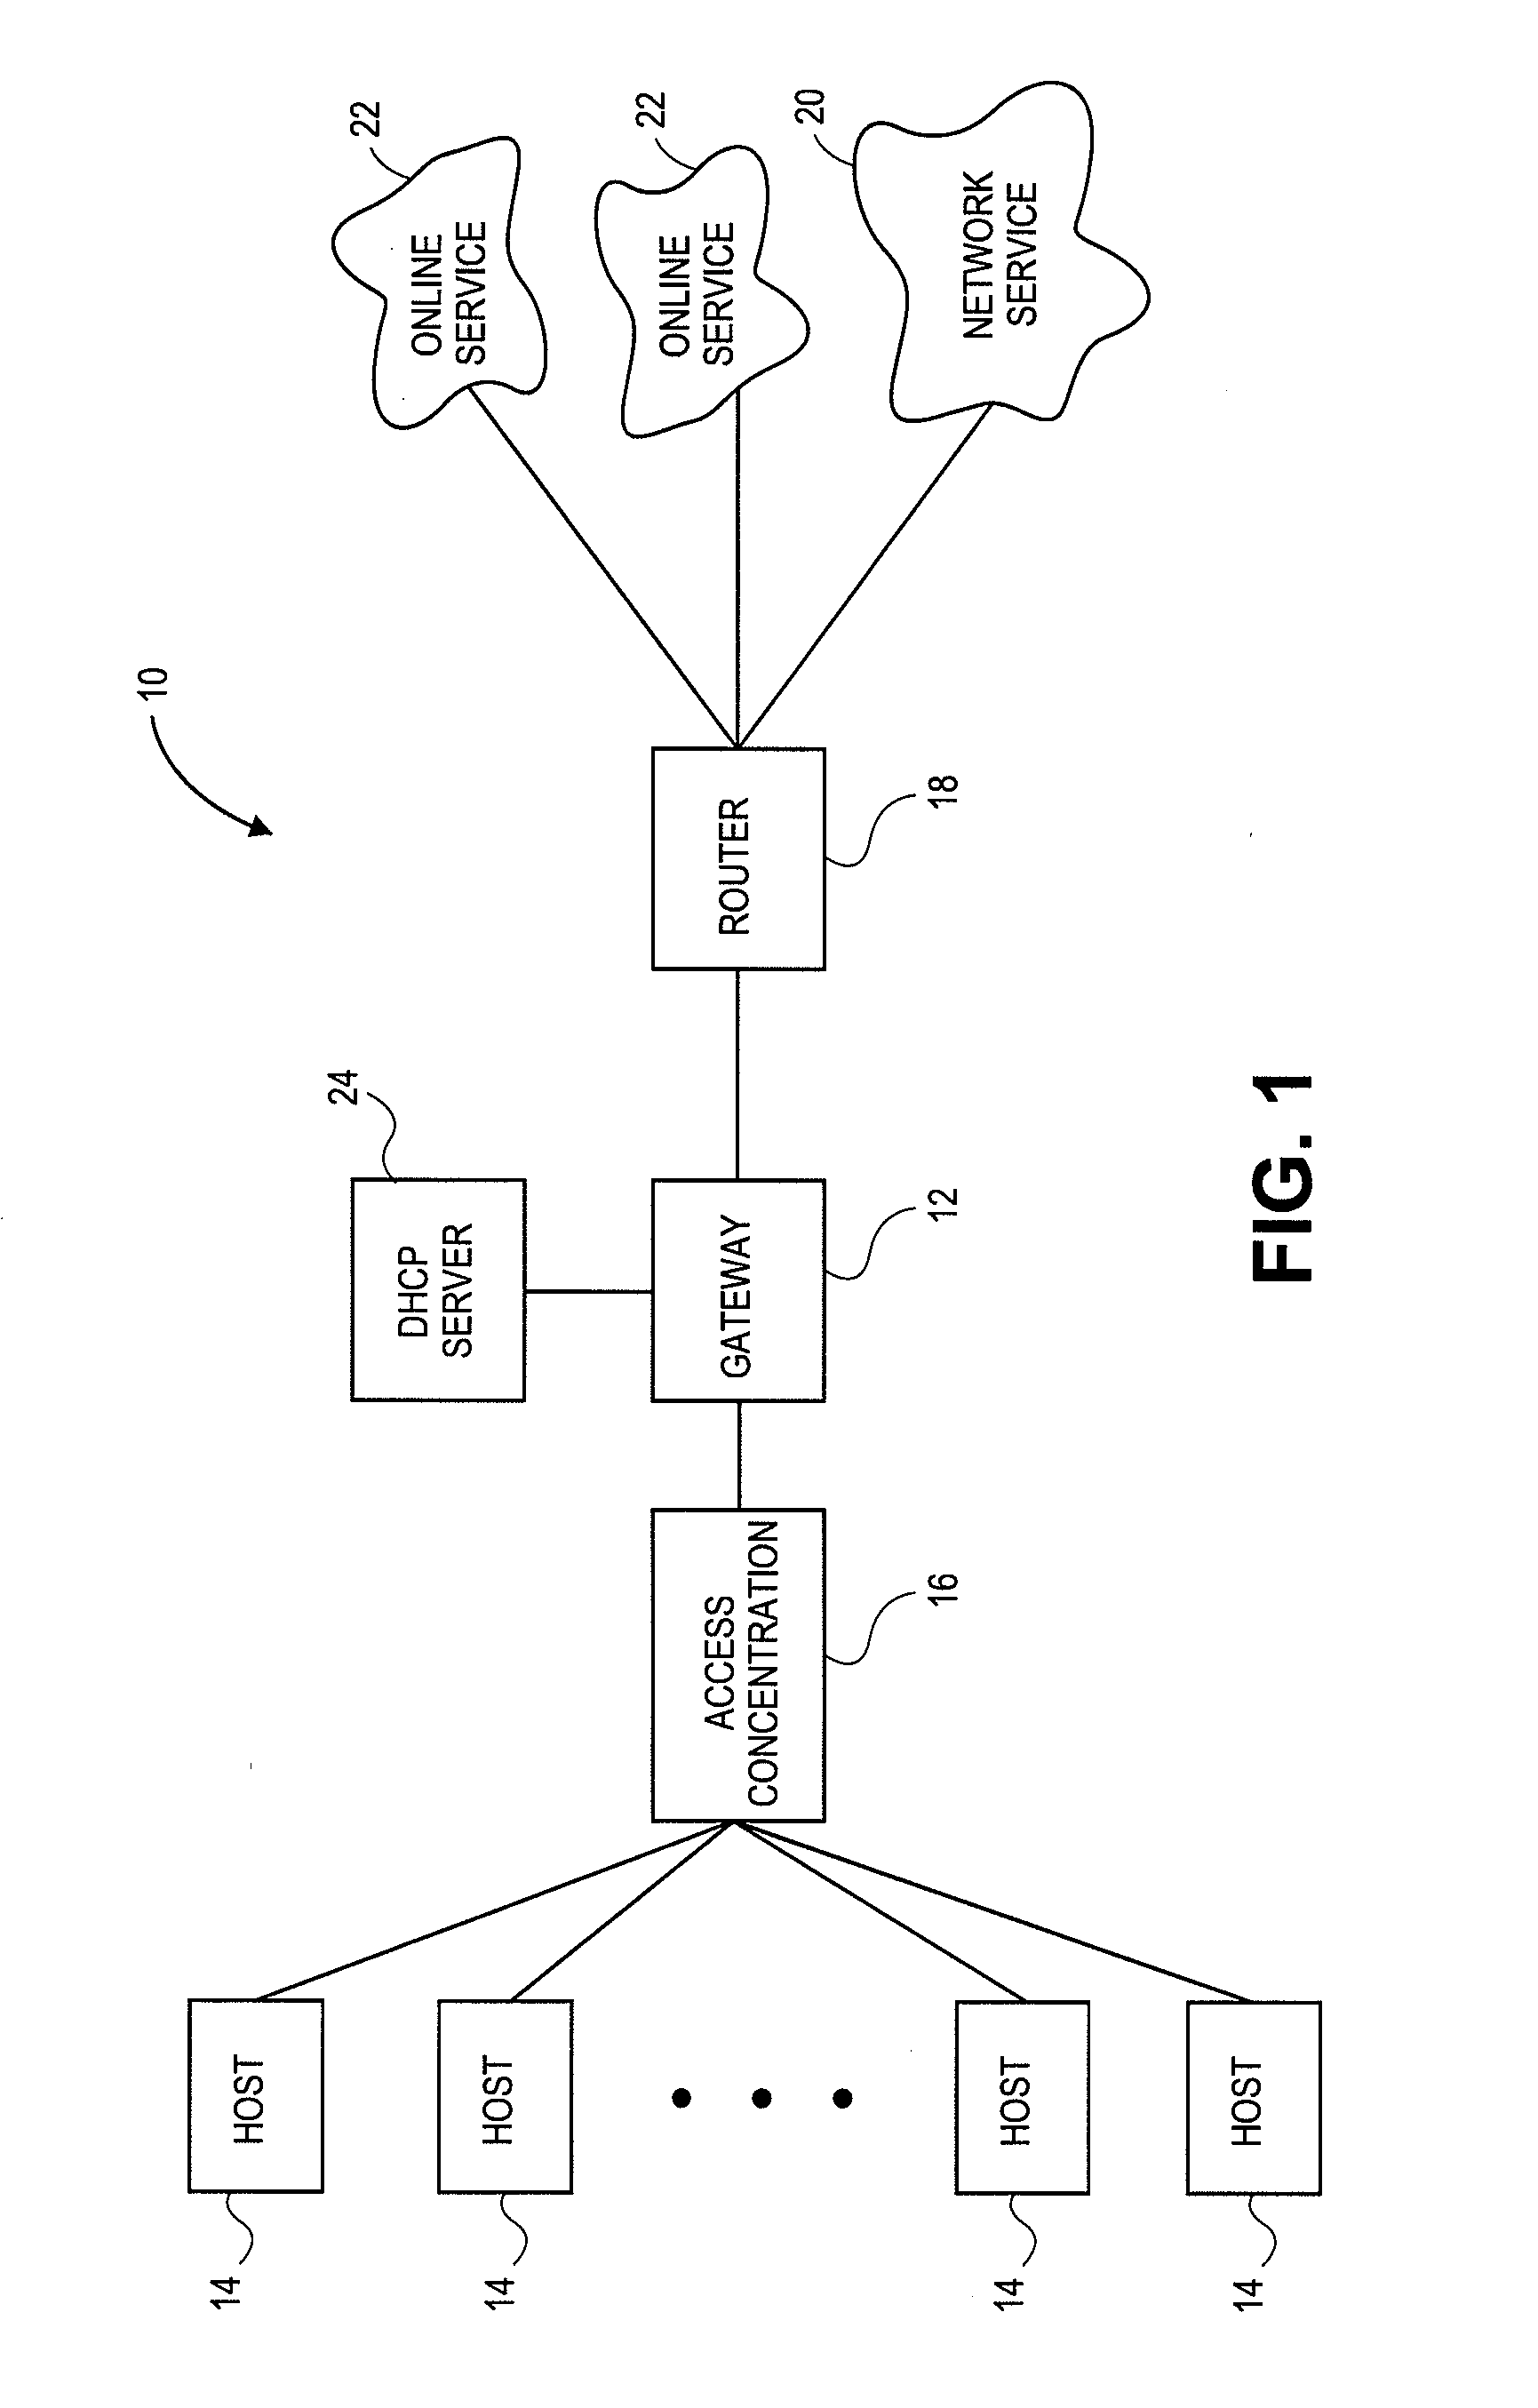 Systems and methods for dynamic bandwidth management on a per subscriber basis in a communications network